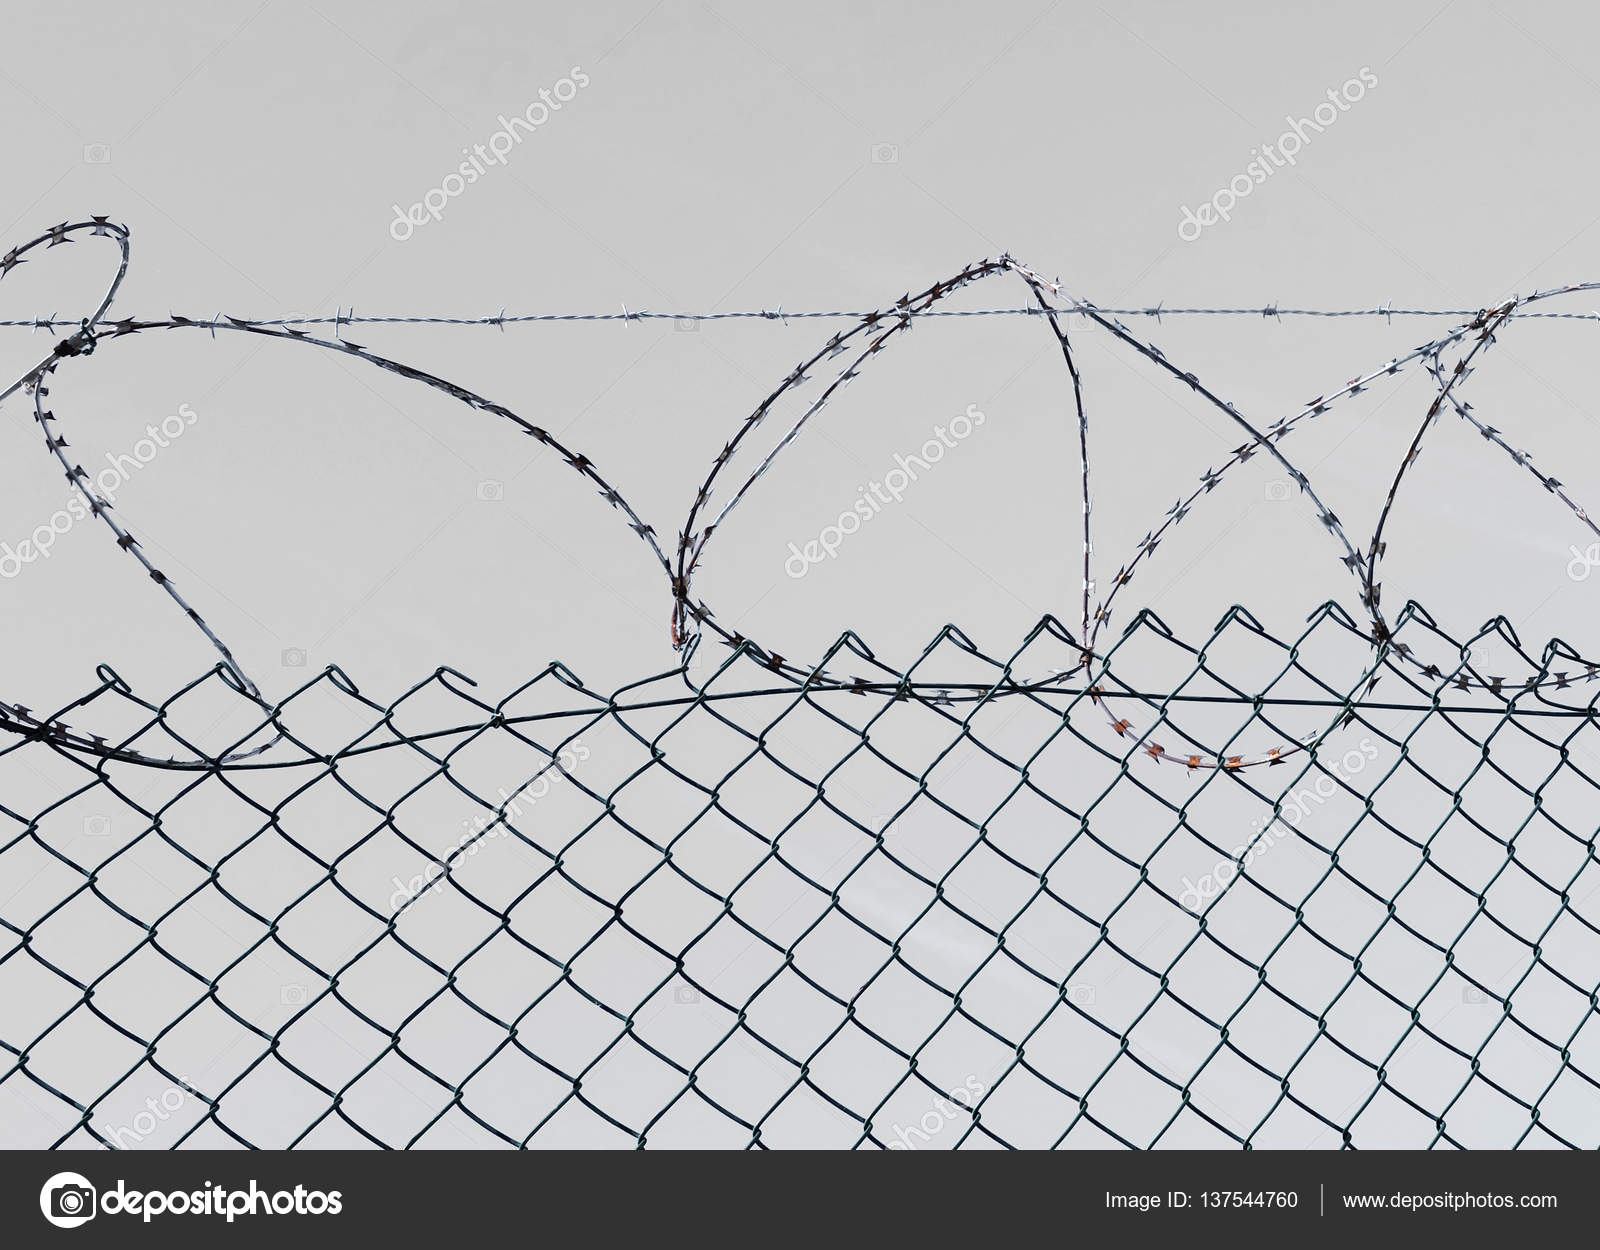 detail of a barbed wire security fence — Stock Photo © annavee ...